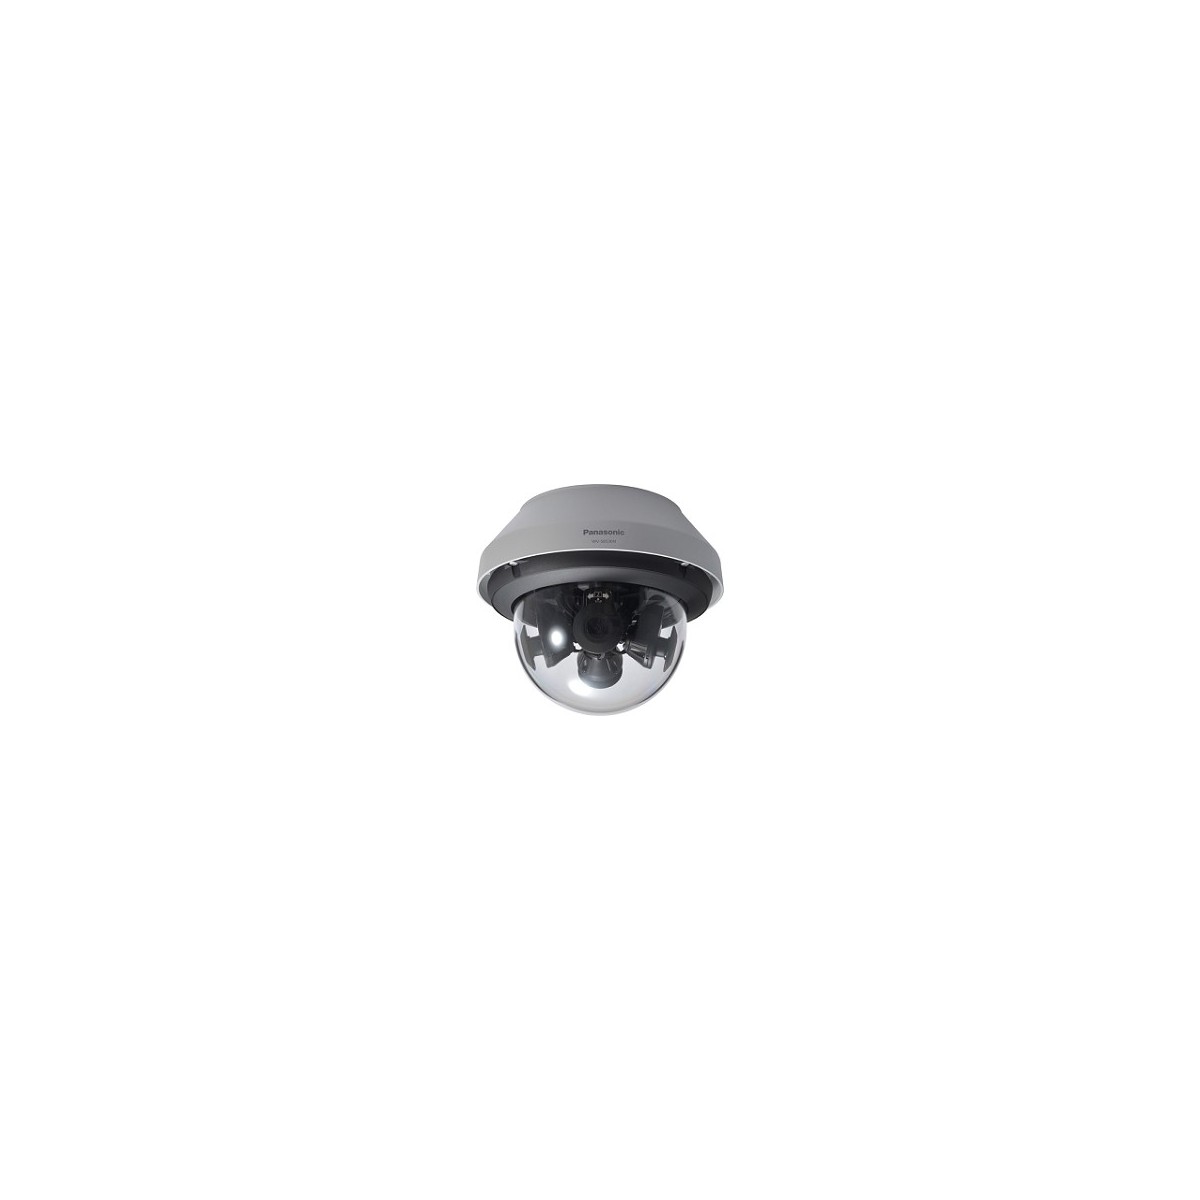 Panasonic WV-S8530N - IP security camera - Outdoor - Wired - Dome - Ceiling - Black - Grey